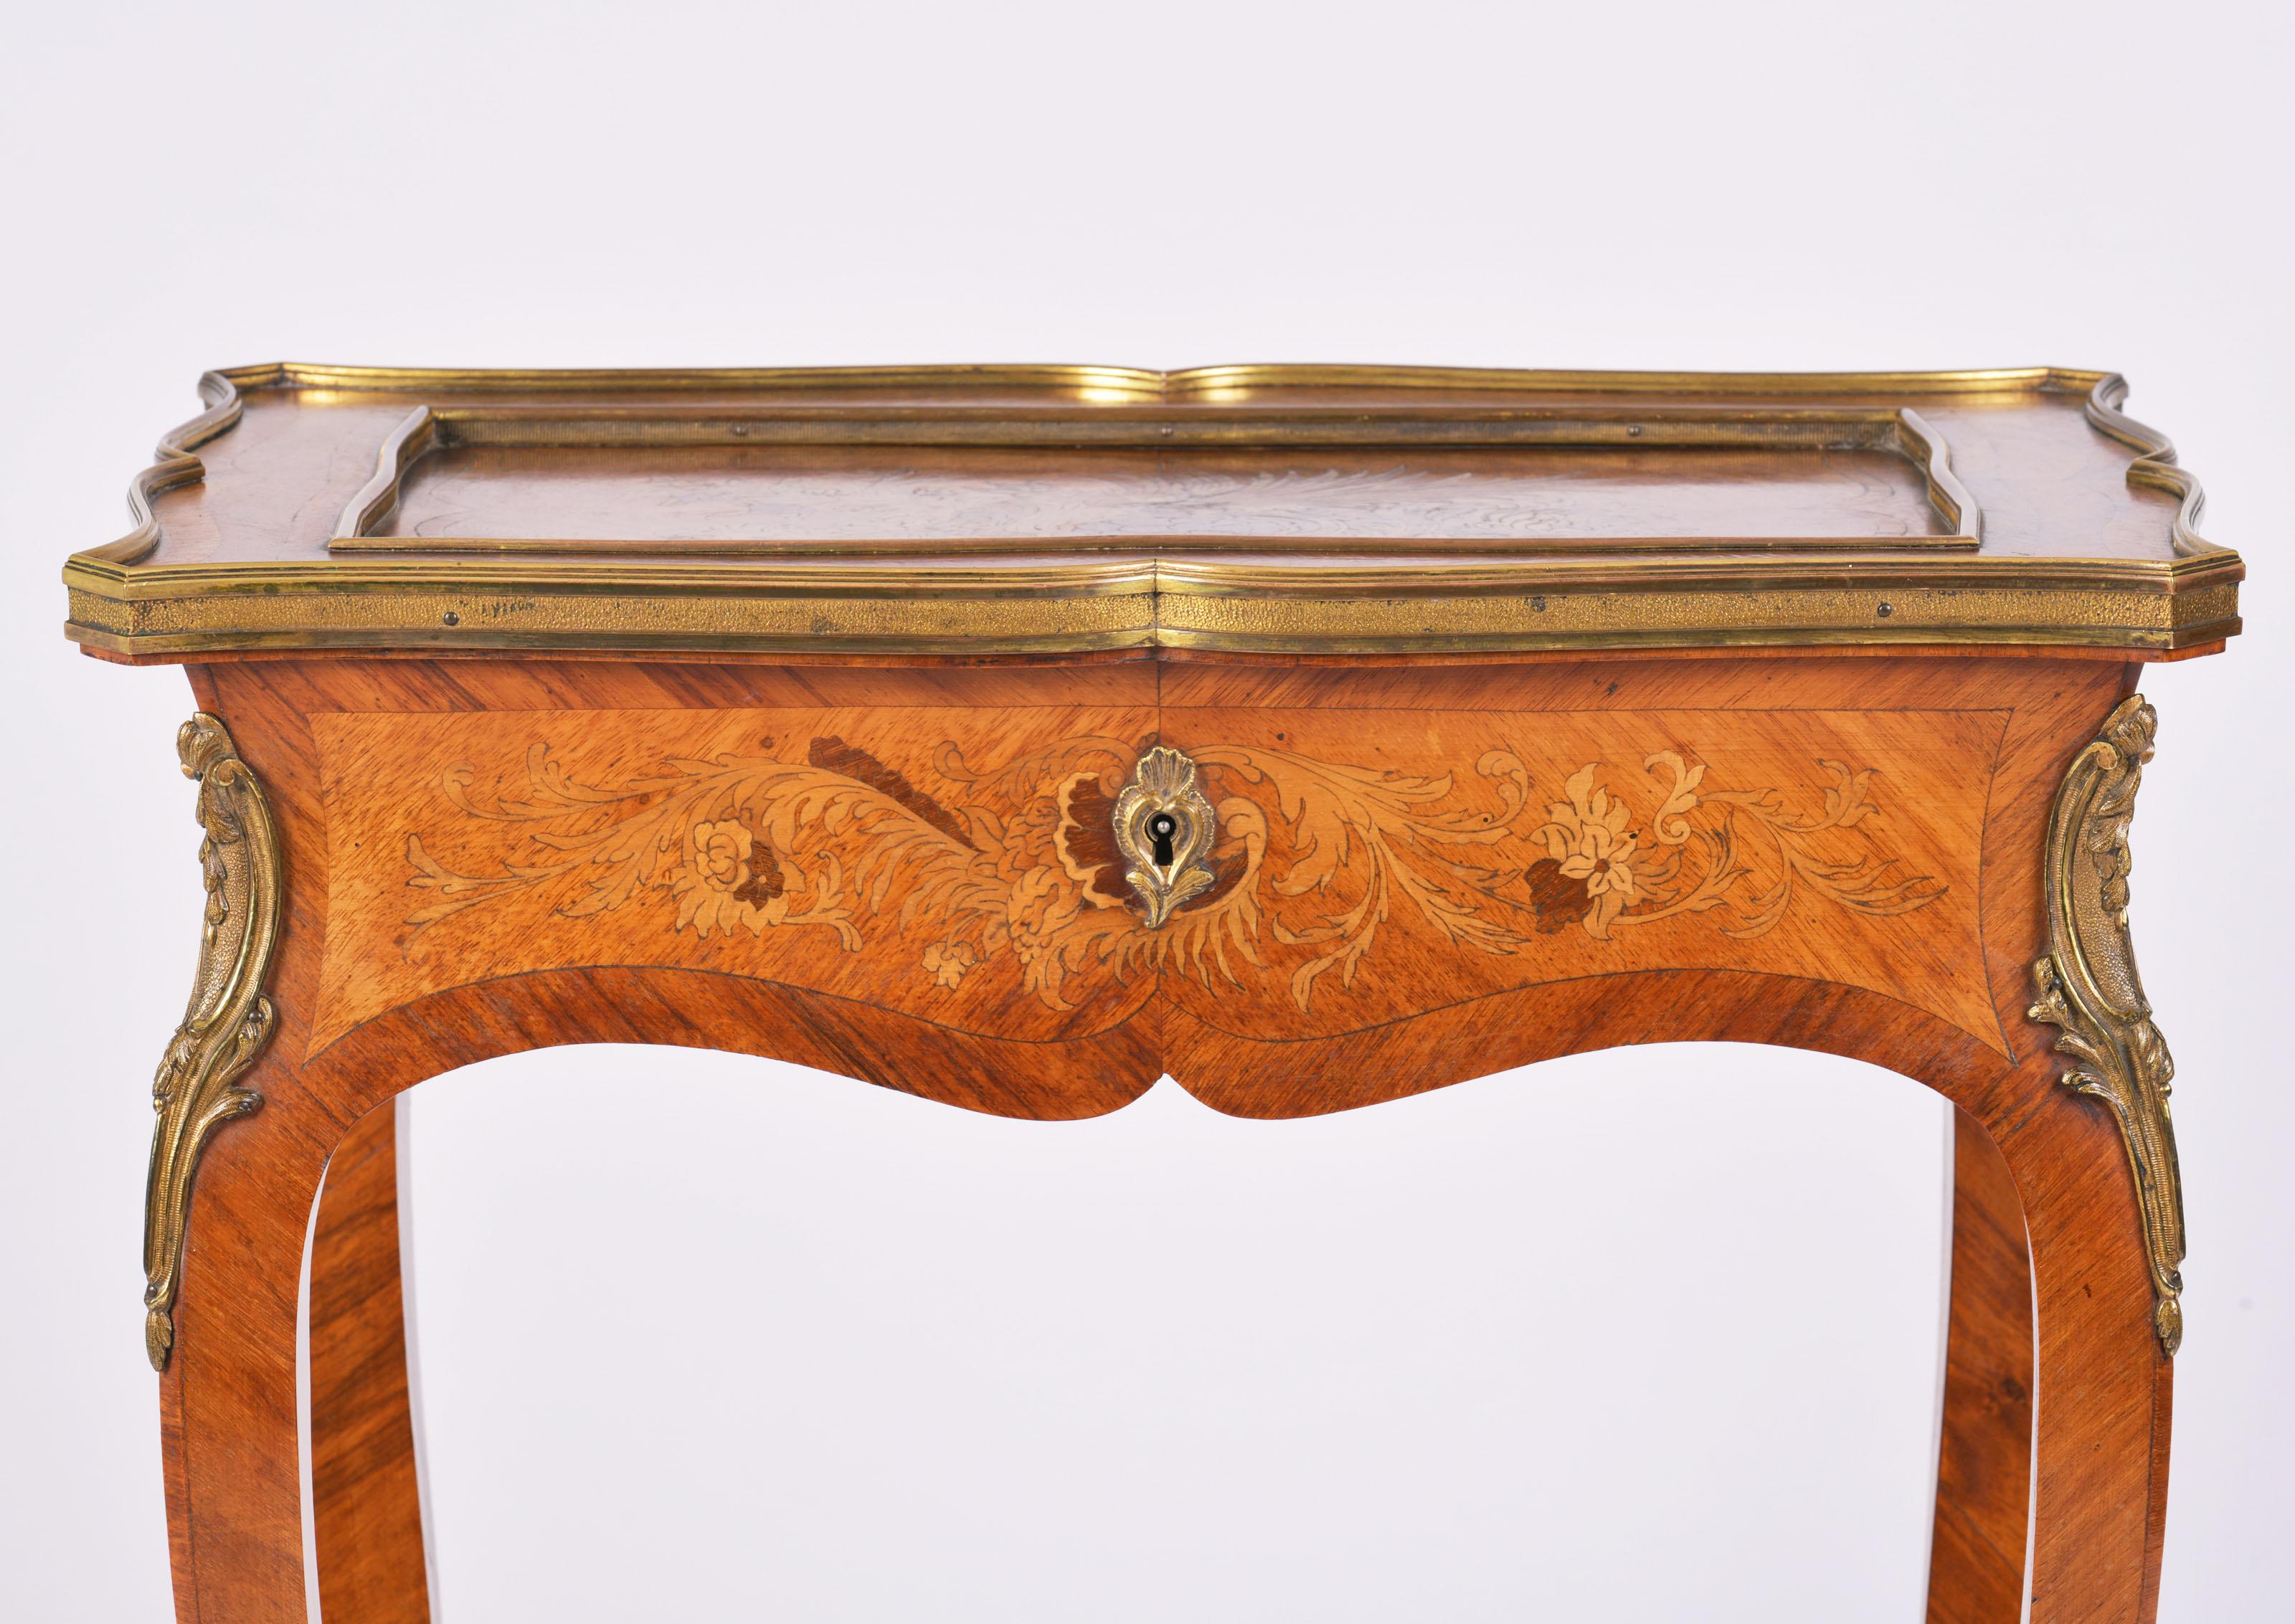 This outstanding and delicately shaped 19th century king wood bijouterie table features intricately designed marquetry inlay work with ornate ormolu mounts and trims. It has a serpentine shaped top with a yellow silk damask lining the inside box and